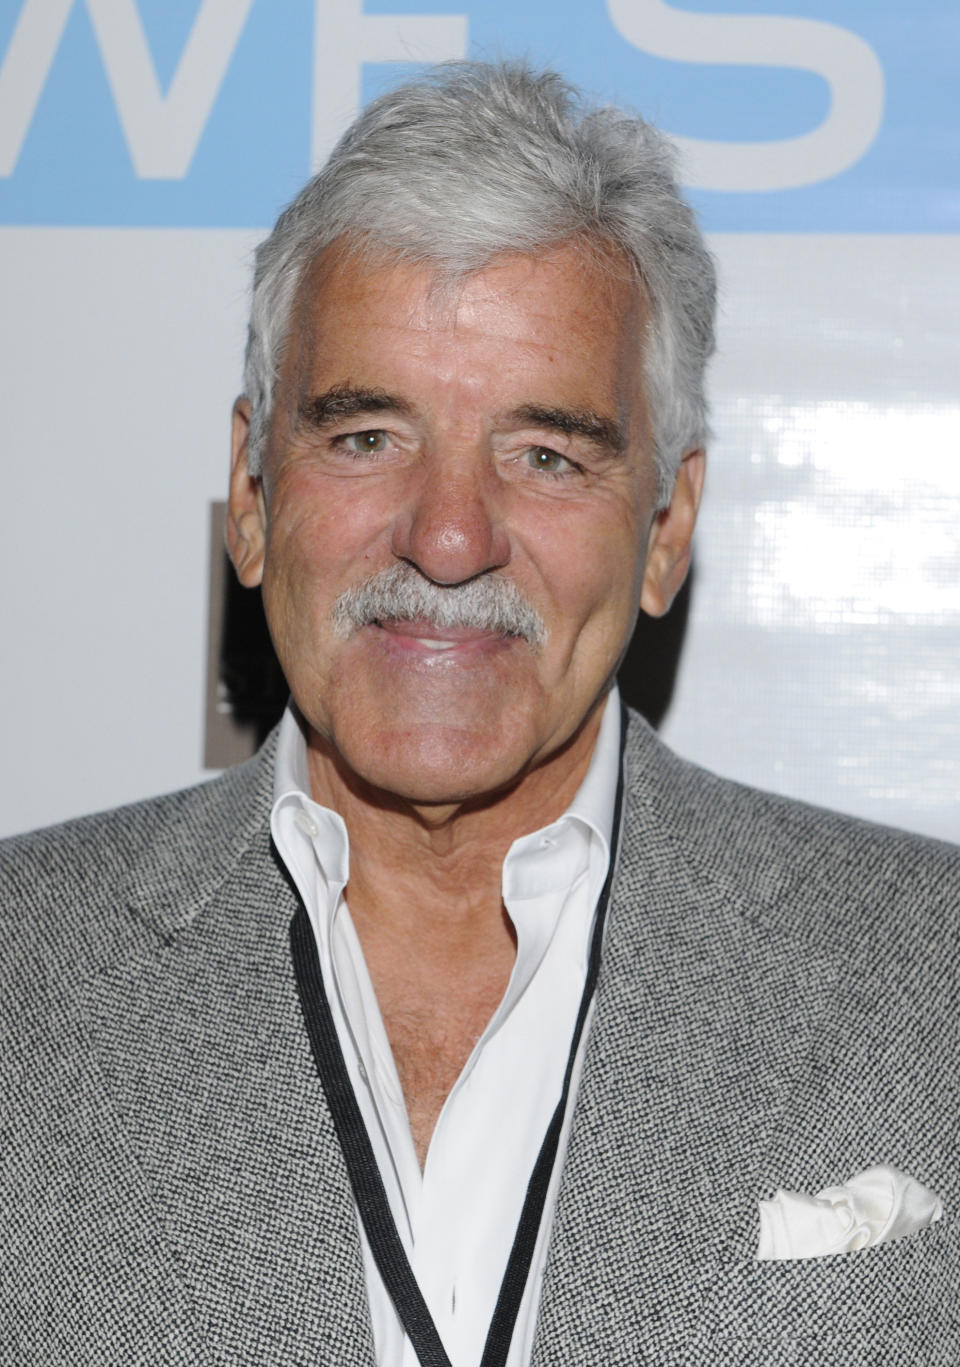 <a href="http://www.huffingtonpost.com/2013/07/22/dennis-farina-dead_n_3635587.html" target="_blank">The "Law & Order" star died on July 22, 2013 at the age of 69</a> after suffering a blood clot in his lung.